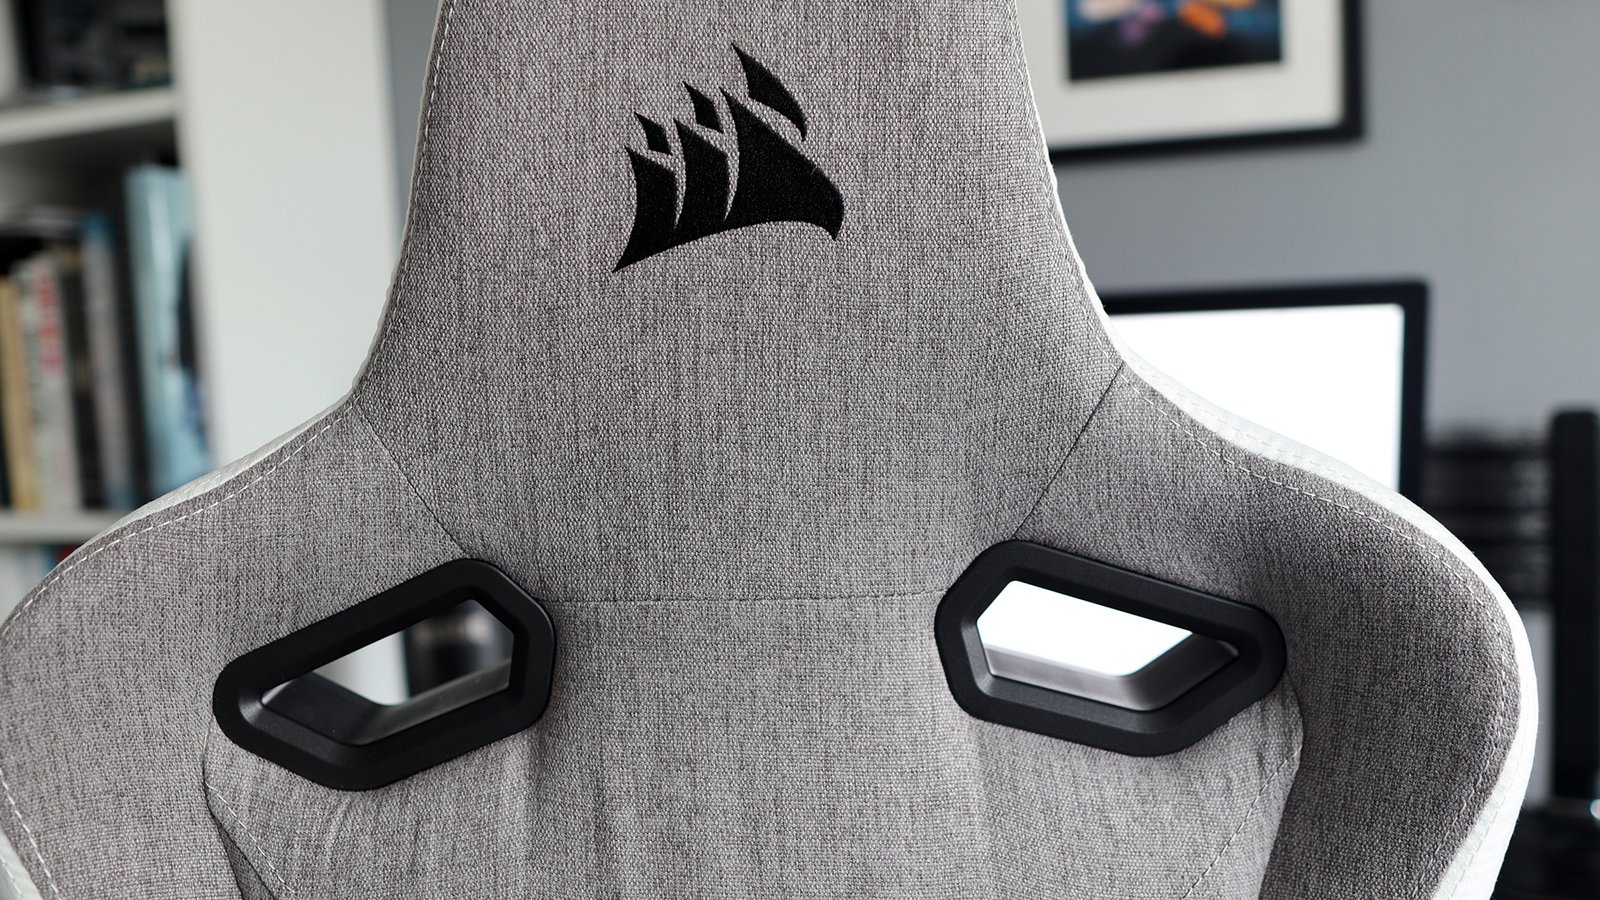 Corsair TC200 gaming chair pictured up-close